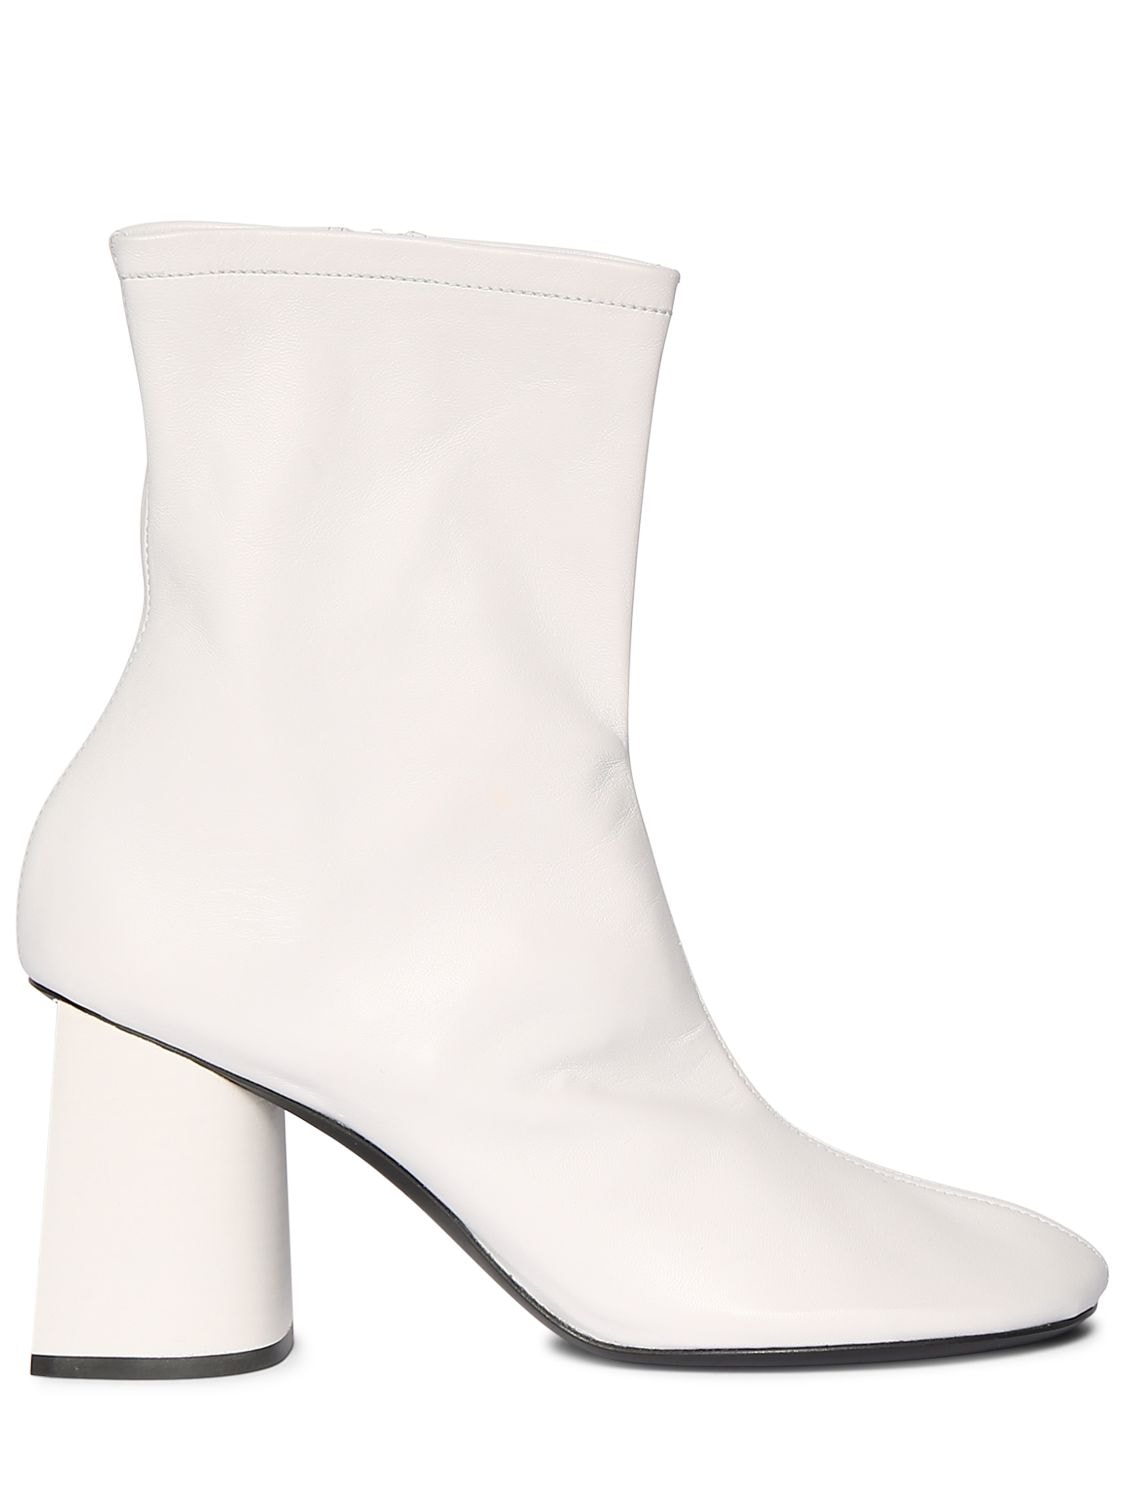 Aquarium straal Catastrofaal Balenciaga 80mm Glove Shiny Leather Ankle Boots In White | ModeSens